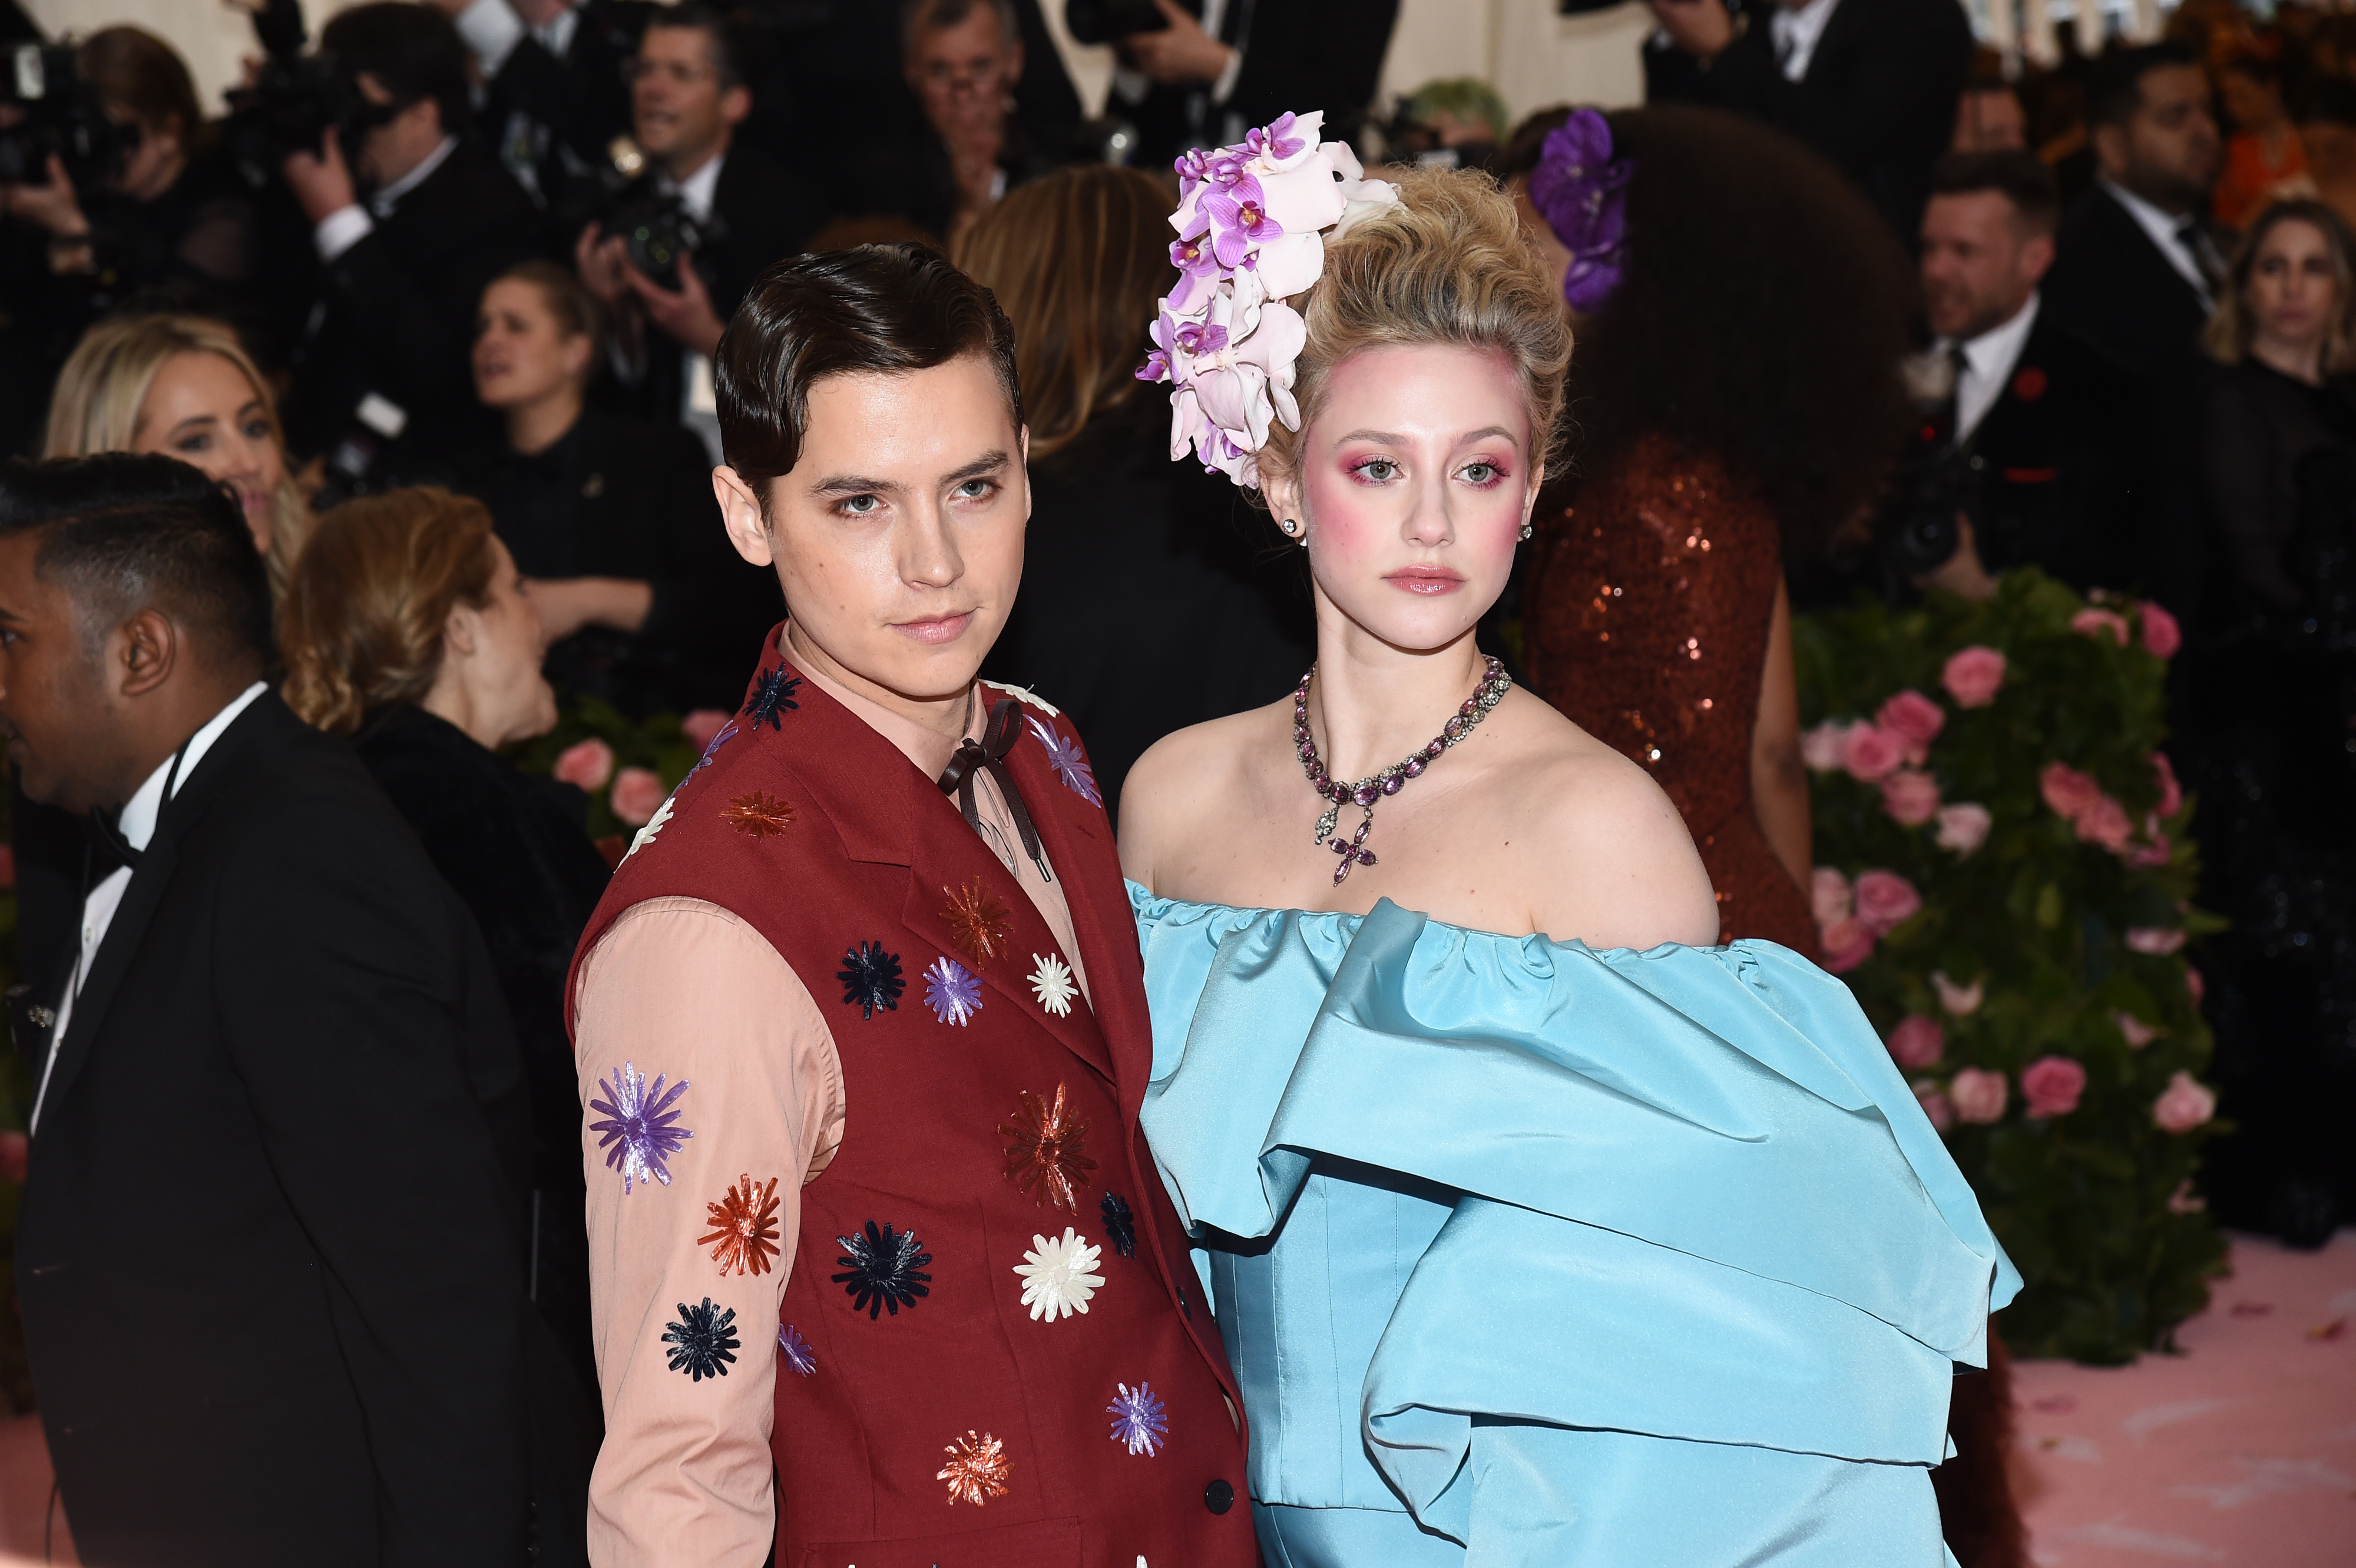 Cole Sprouse and Lili Reinhart on the red carpet. Cole is wearing a two-toned jacket with embroidered star bursts and Lili is wearing a off-the-shoulder dress with multiple flowers in her hair